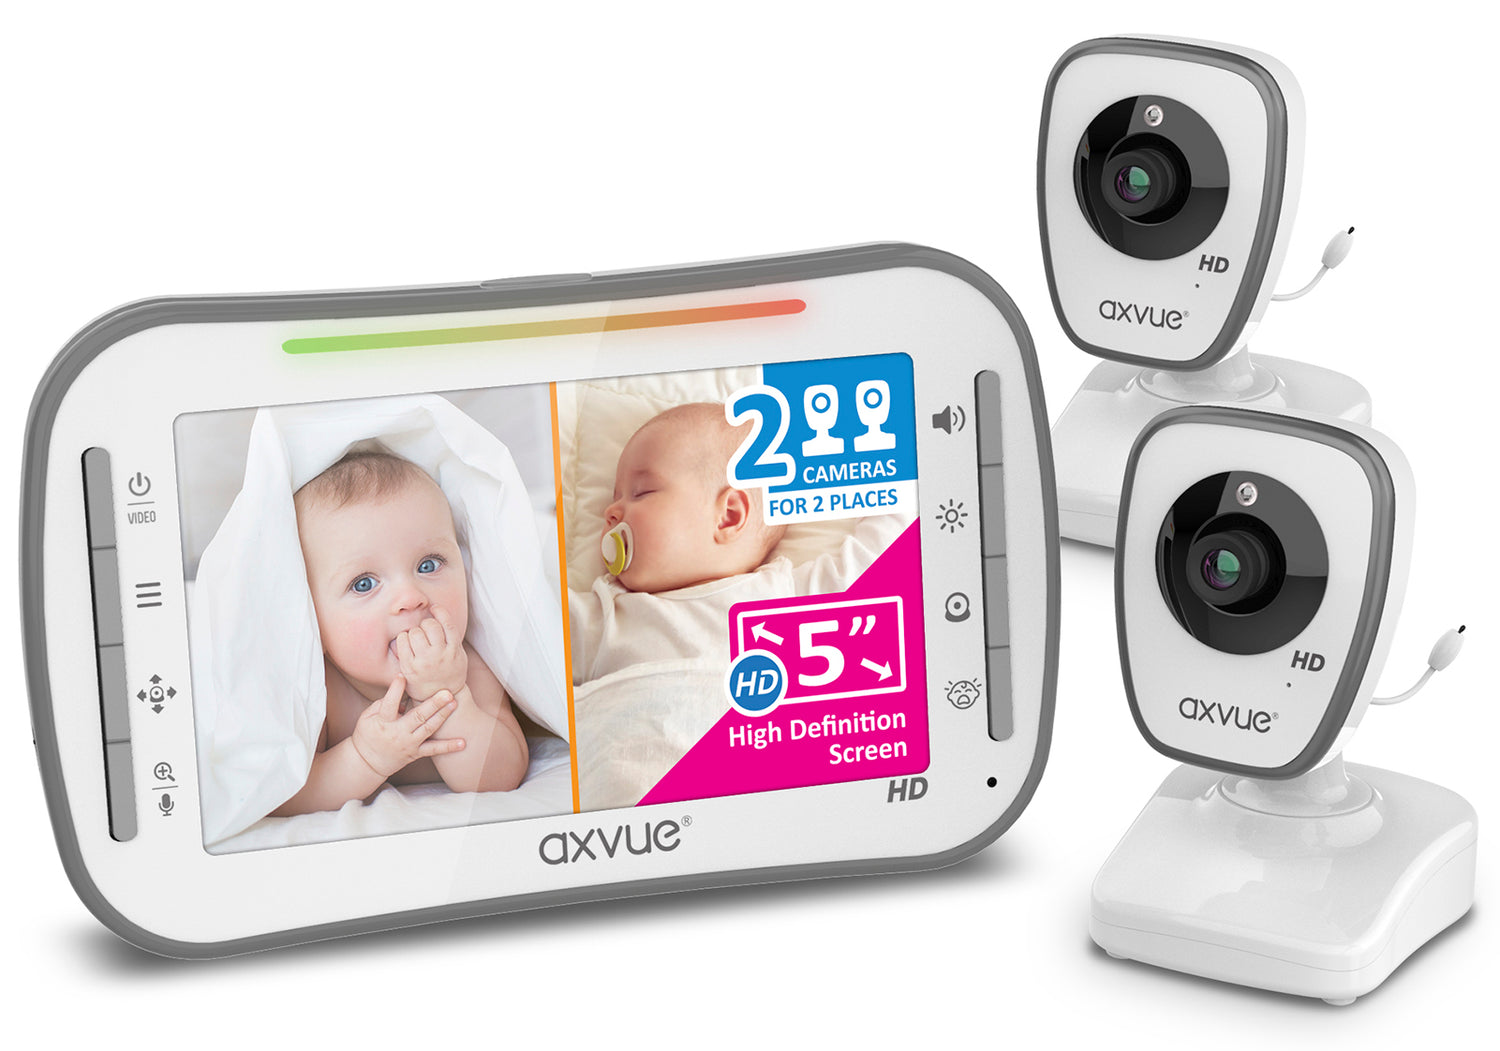 AXVUE HD992 720P HD baby monitor, is listed at <Best Baby Monitors for Twins of 2023>